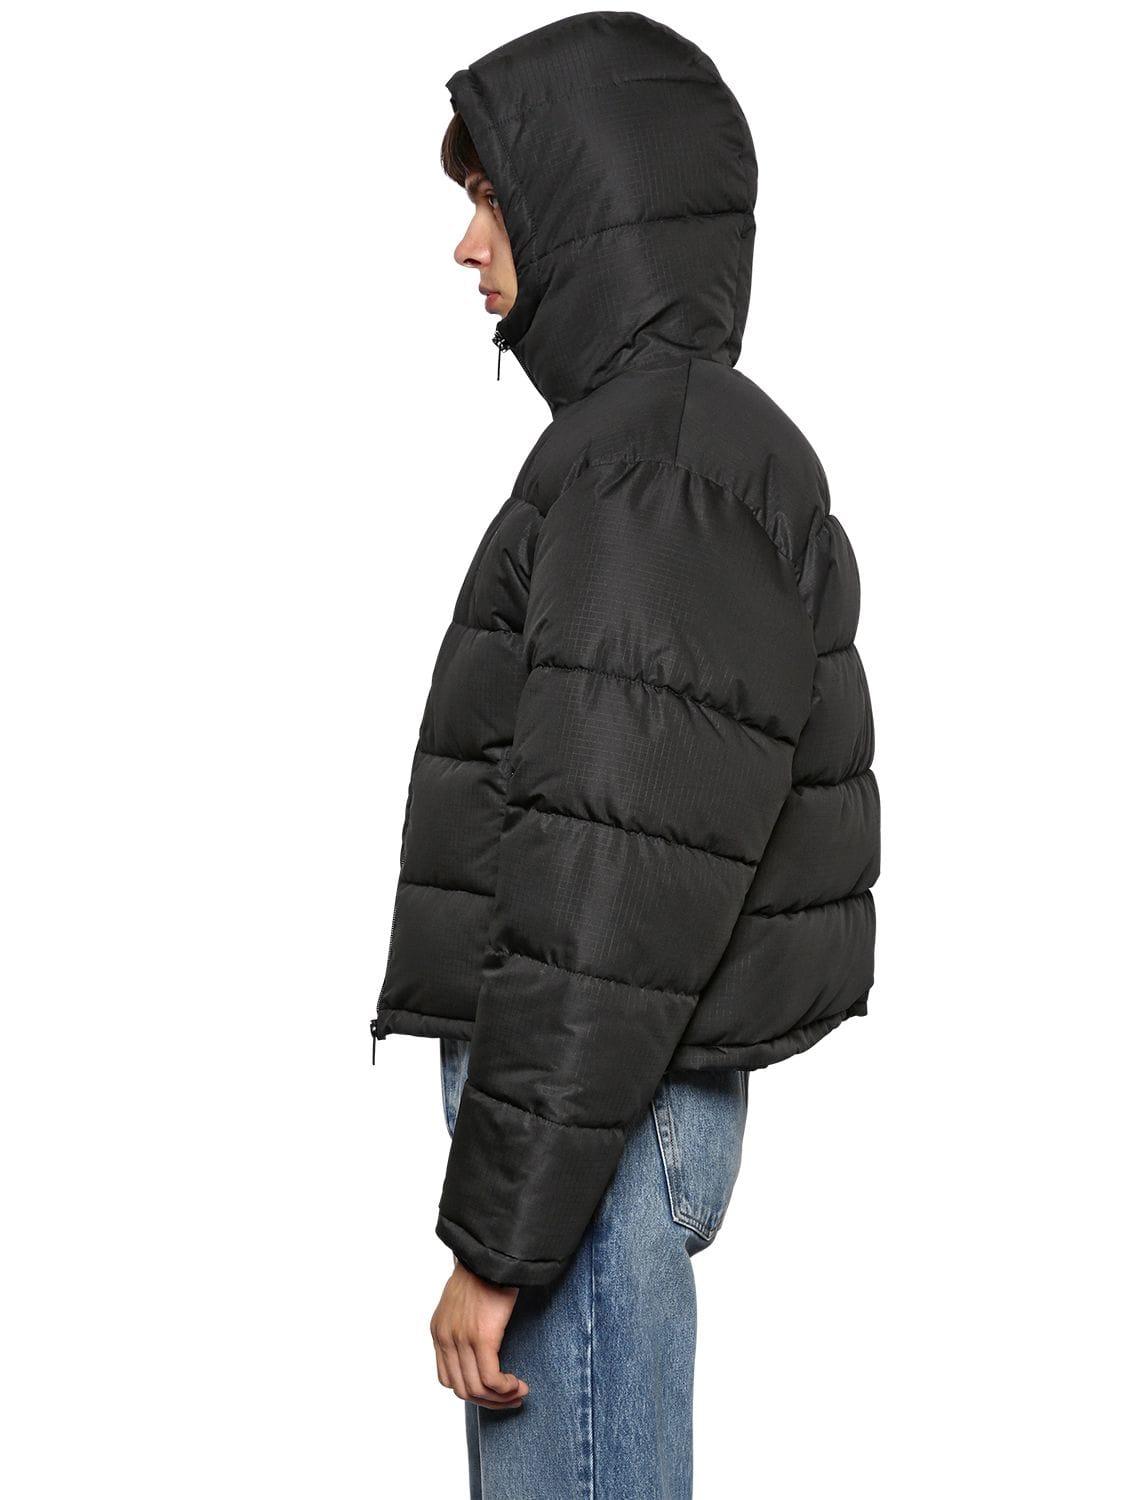 Balenciaga Hooded Nylon Cropped Puffer Jacket in Black for Men | Lyst